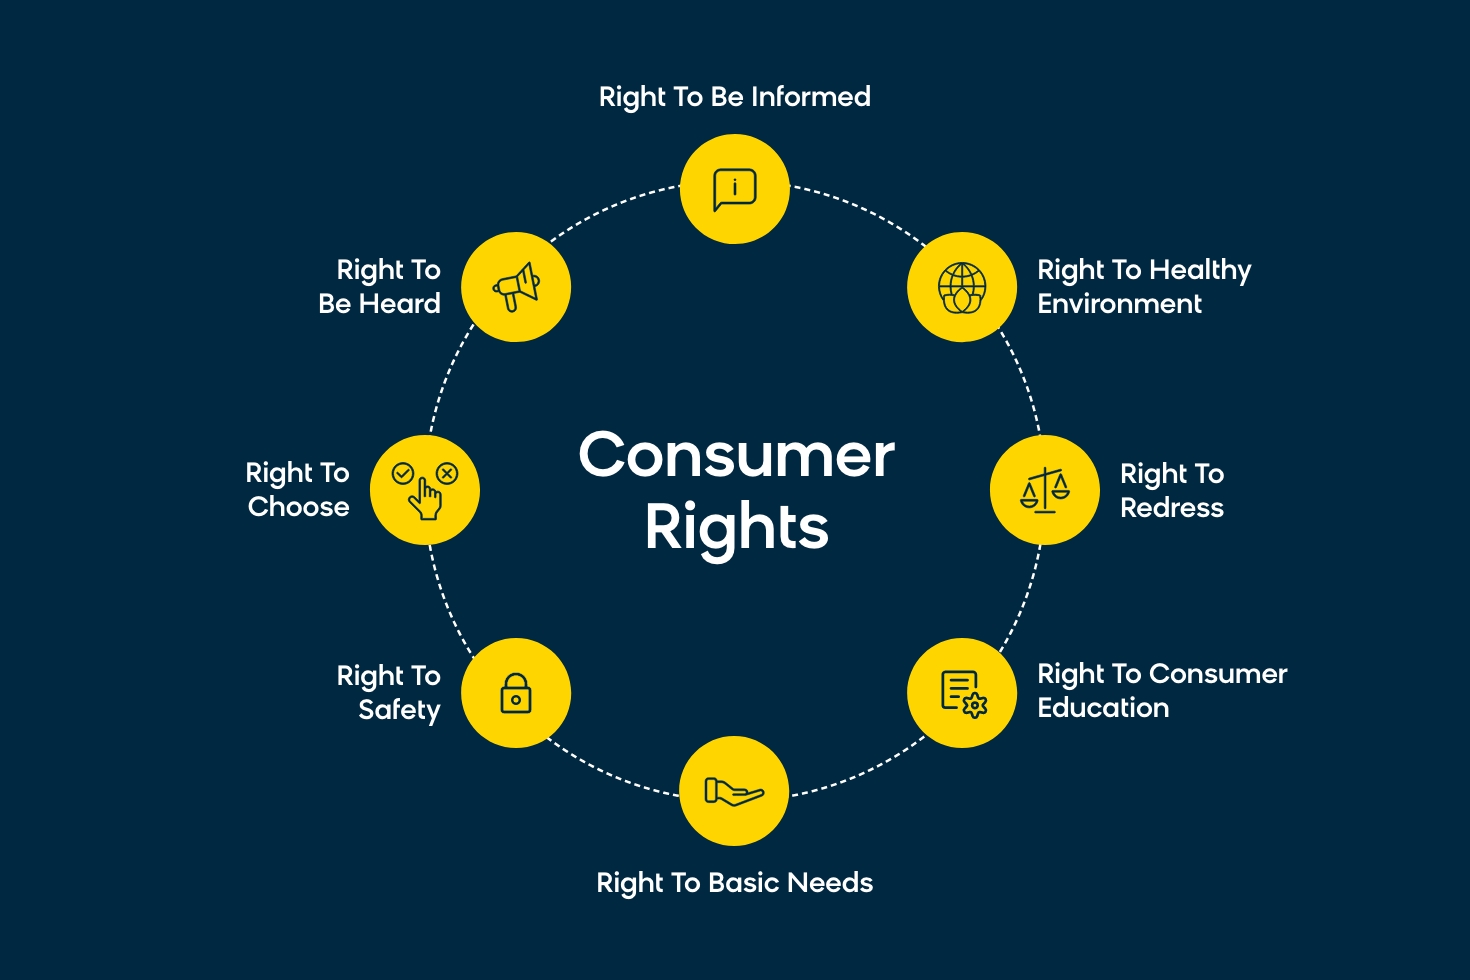 Consumer Rights as Related to the GDPR